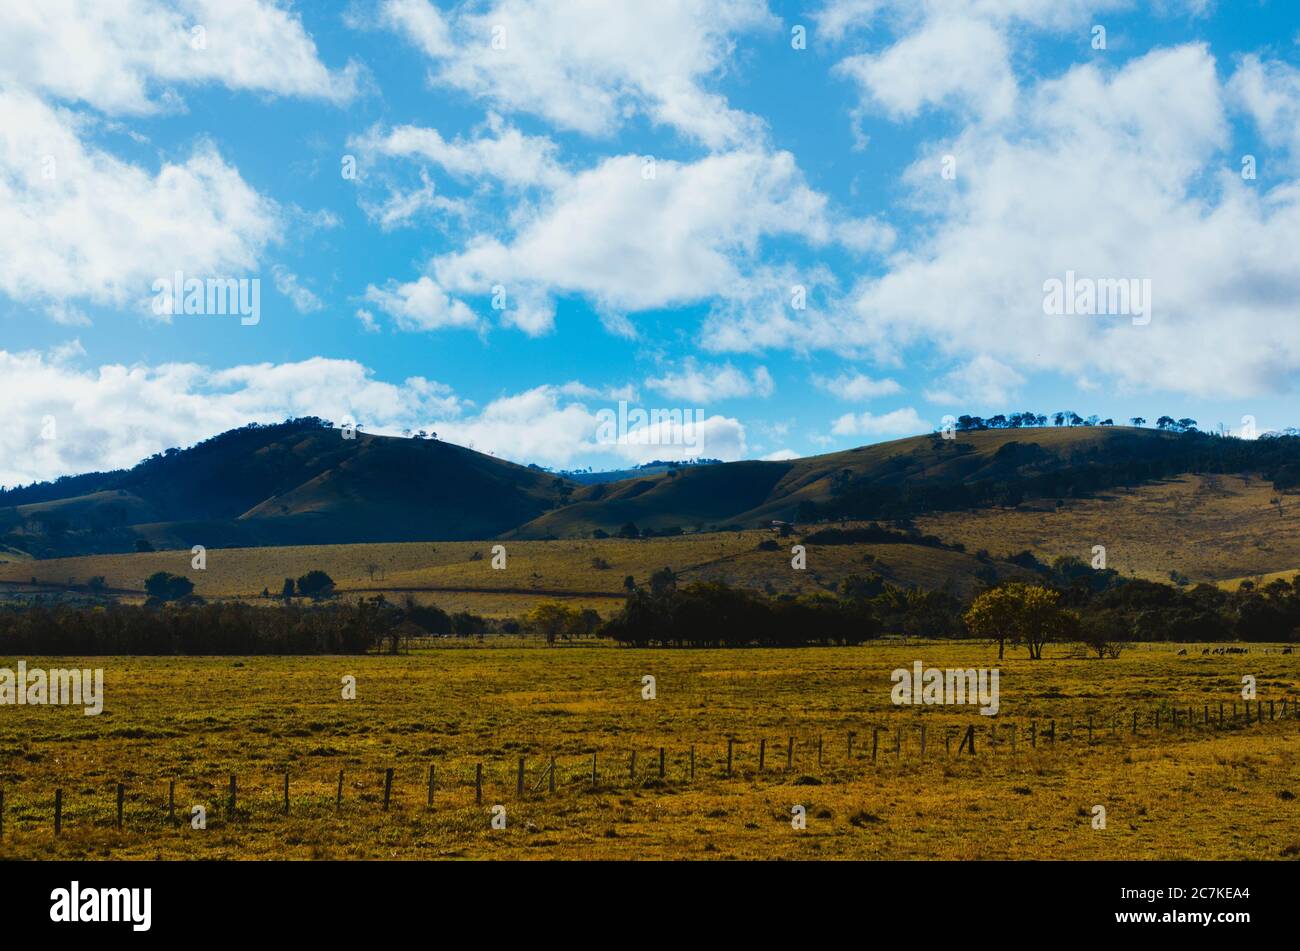 Dramatic view of Minas Gerais hills and farms in different tones of green. Stock Photo